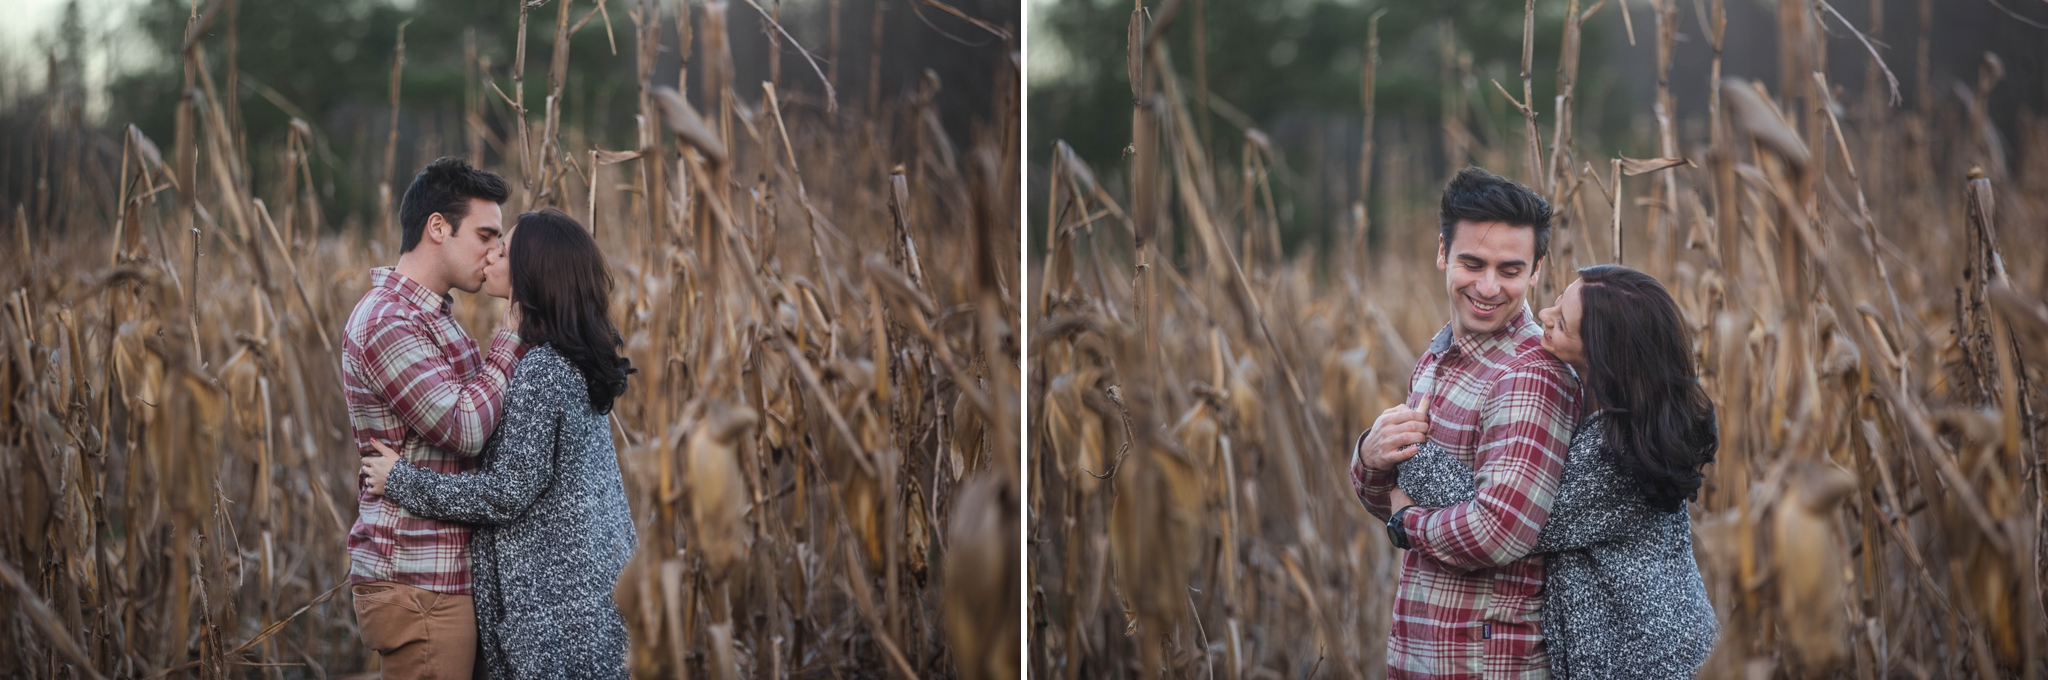 Fayetteville North Carolina Engagement Photographer - Rustic Cornfield Engagement Session - Mike and Jessica